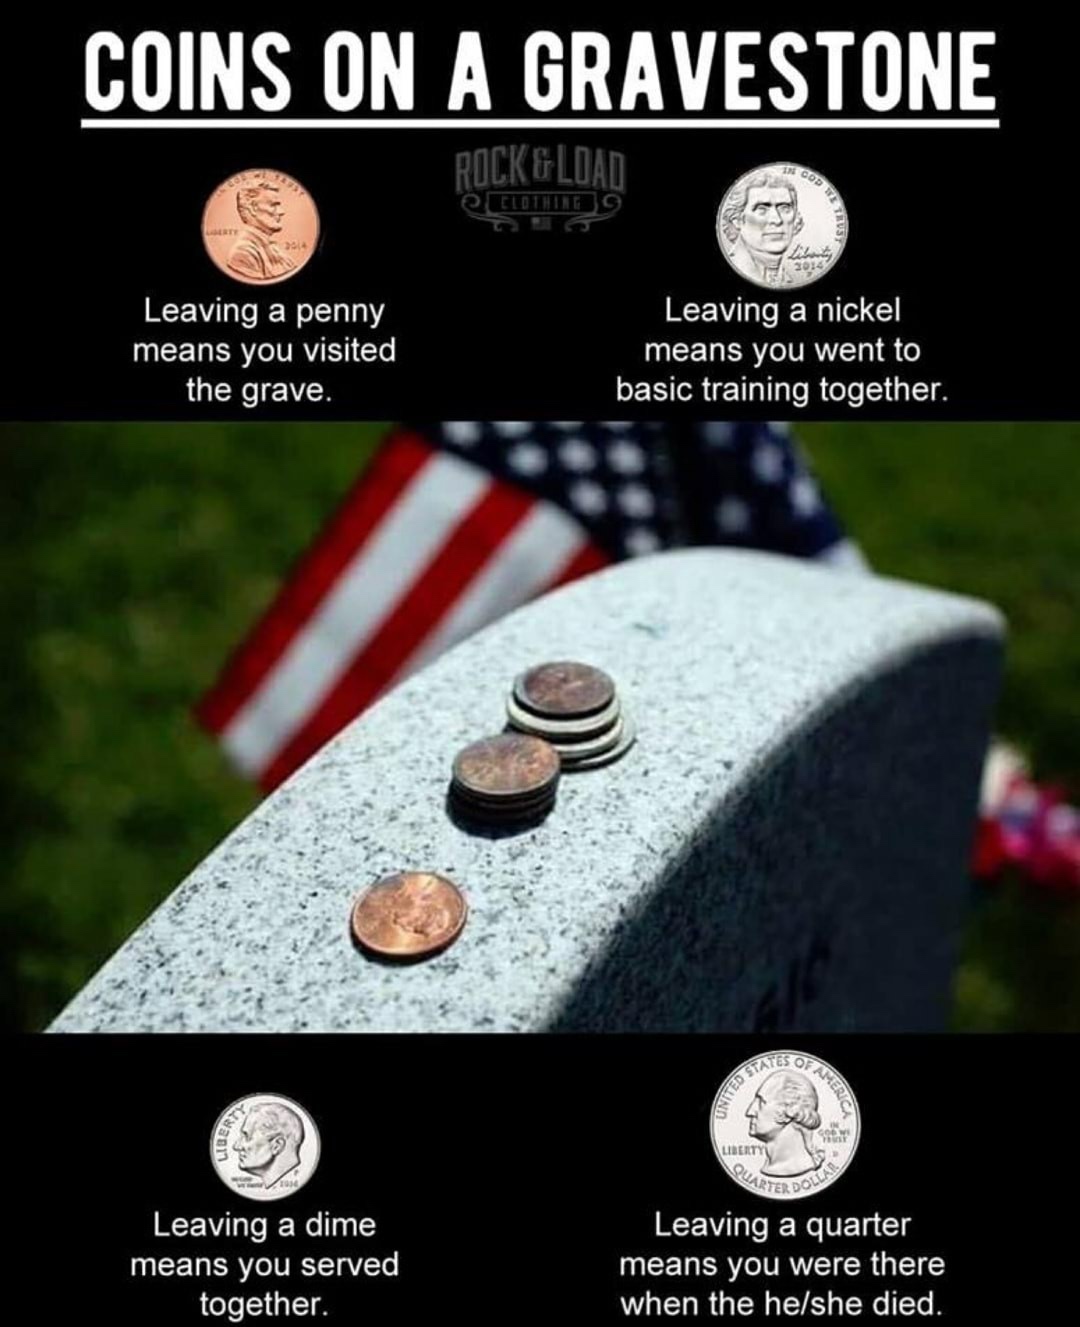 coins on a gravestone - Coins On A Gravestone Rock&Load Cod Gal Leaving a penny means you visited the grave. Leaving a nickel means you went to basic training together. Ces Of United Sa Serica Cider Redo Dolla Leaving a dime means you served together. Lea